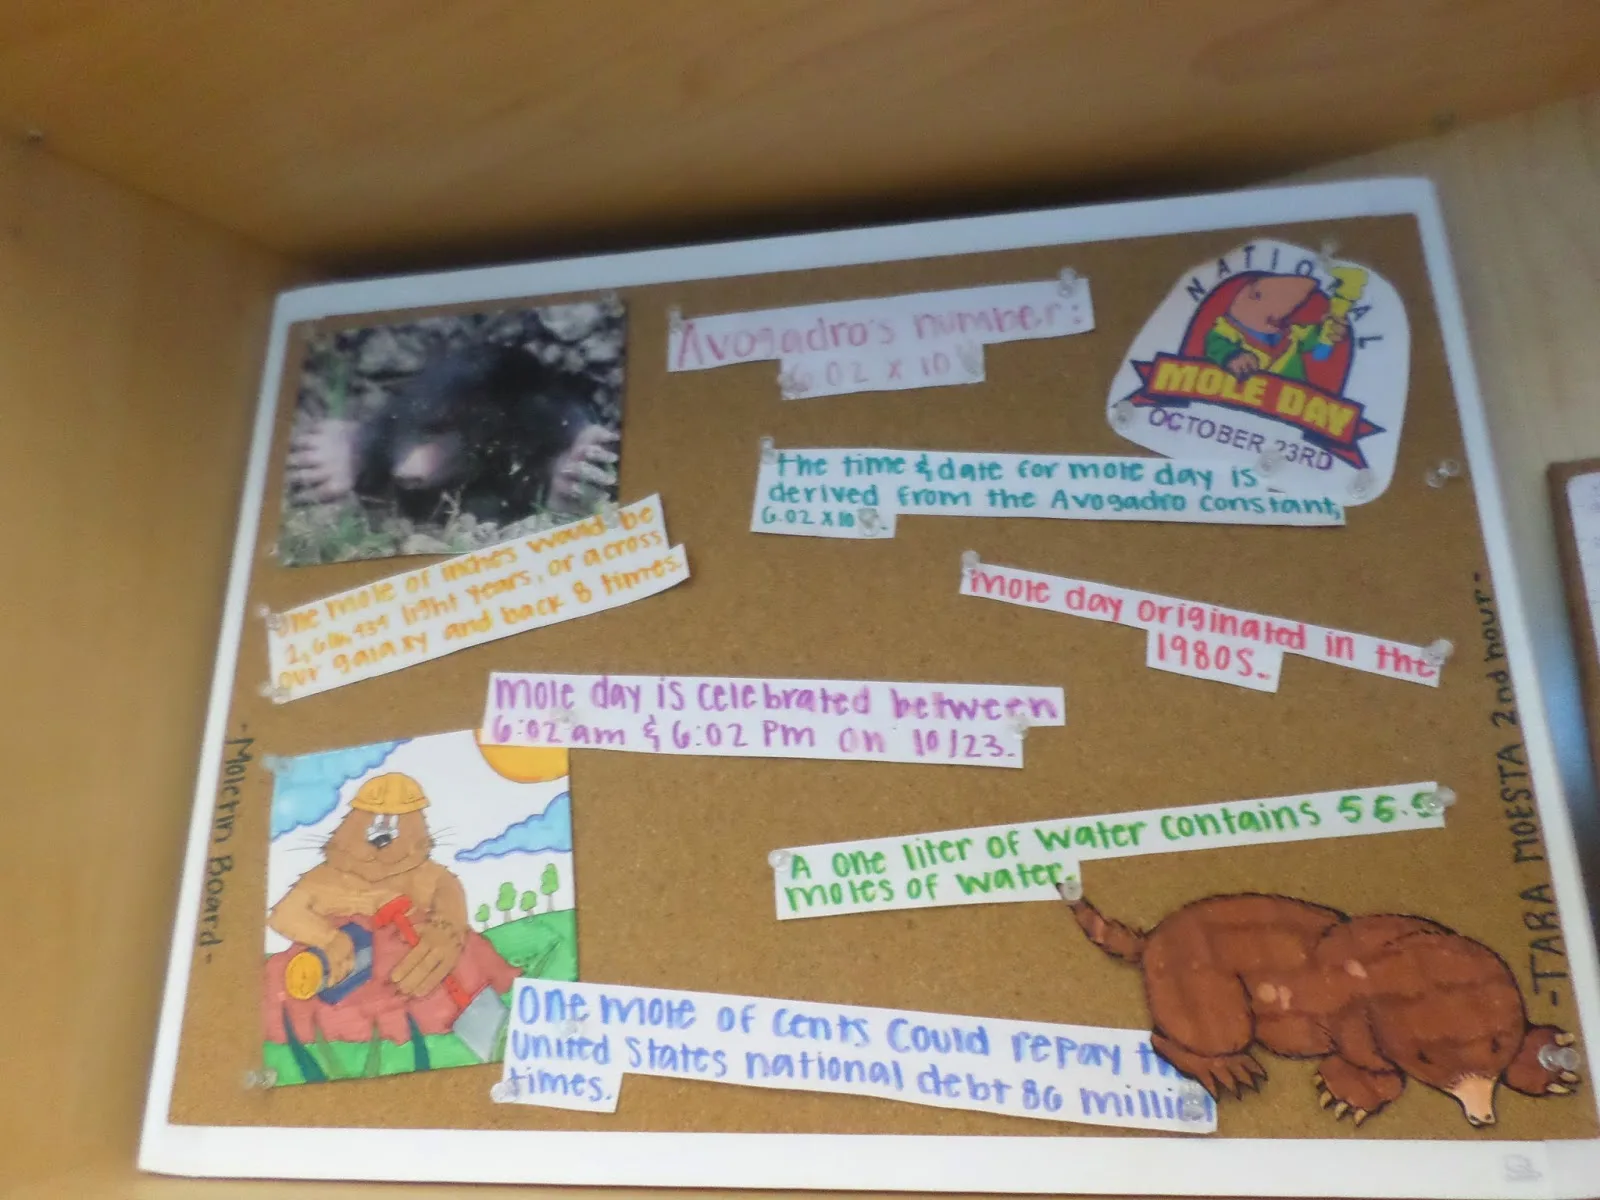 mole day decorations and ideas bulletin boards chemistry science activity